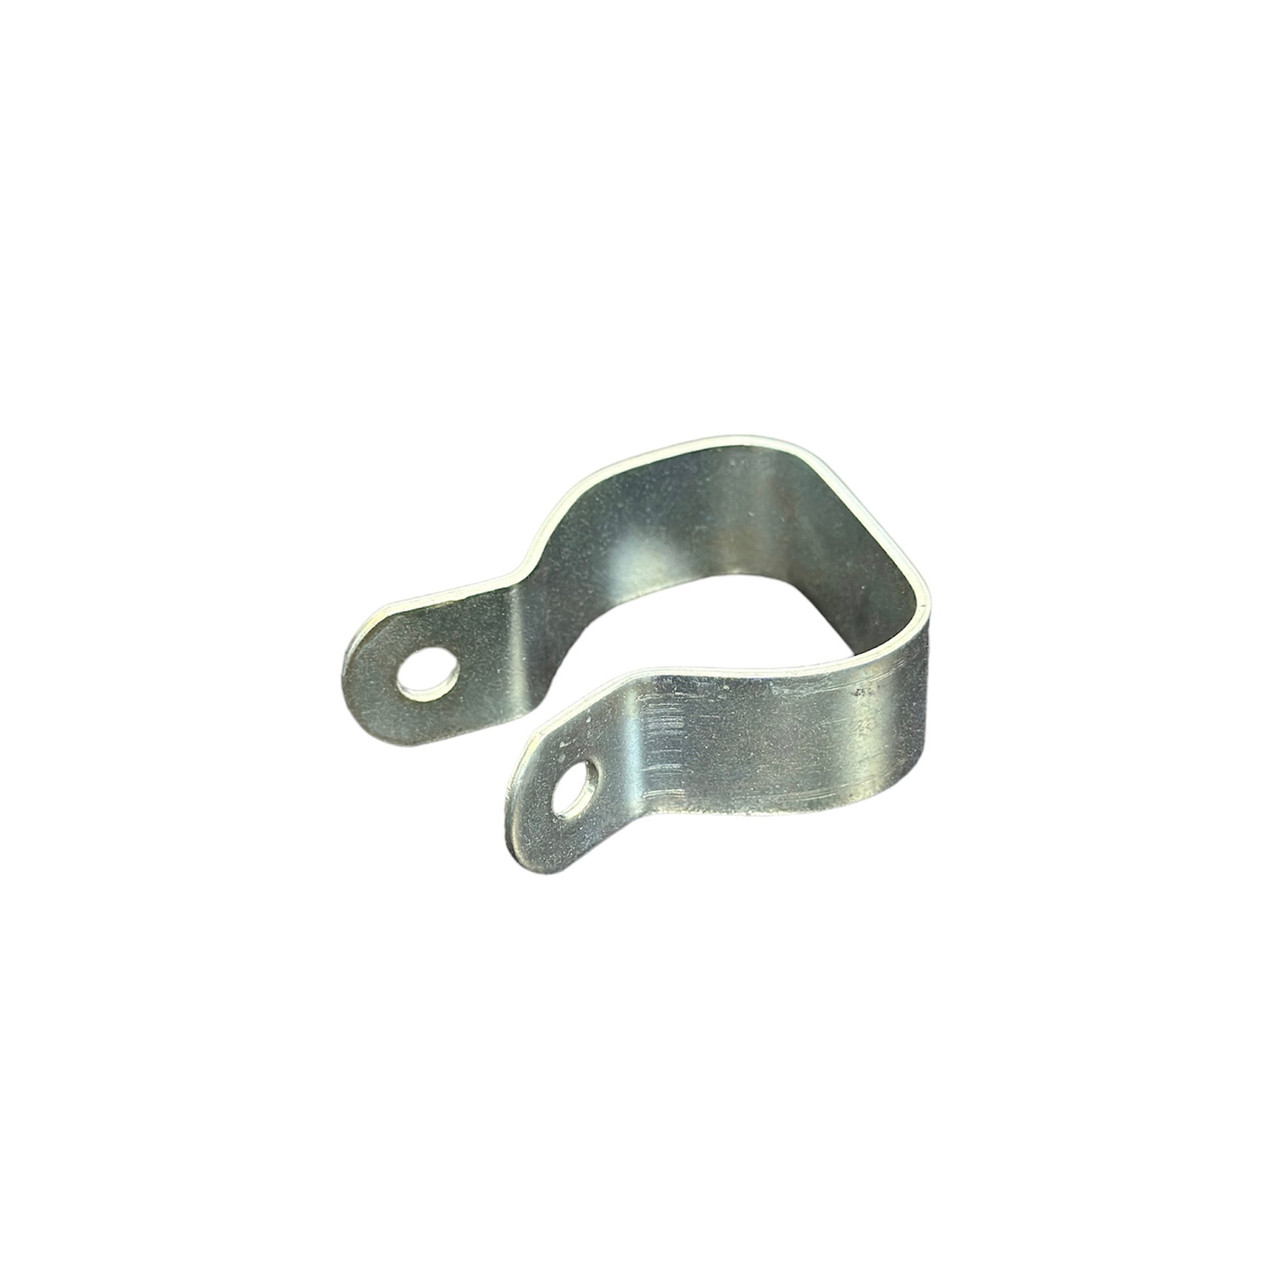 LadderProducts.com | Universal D-Rung Extension Ladder Pulley Bracket